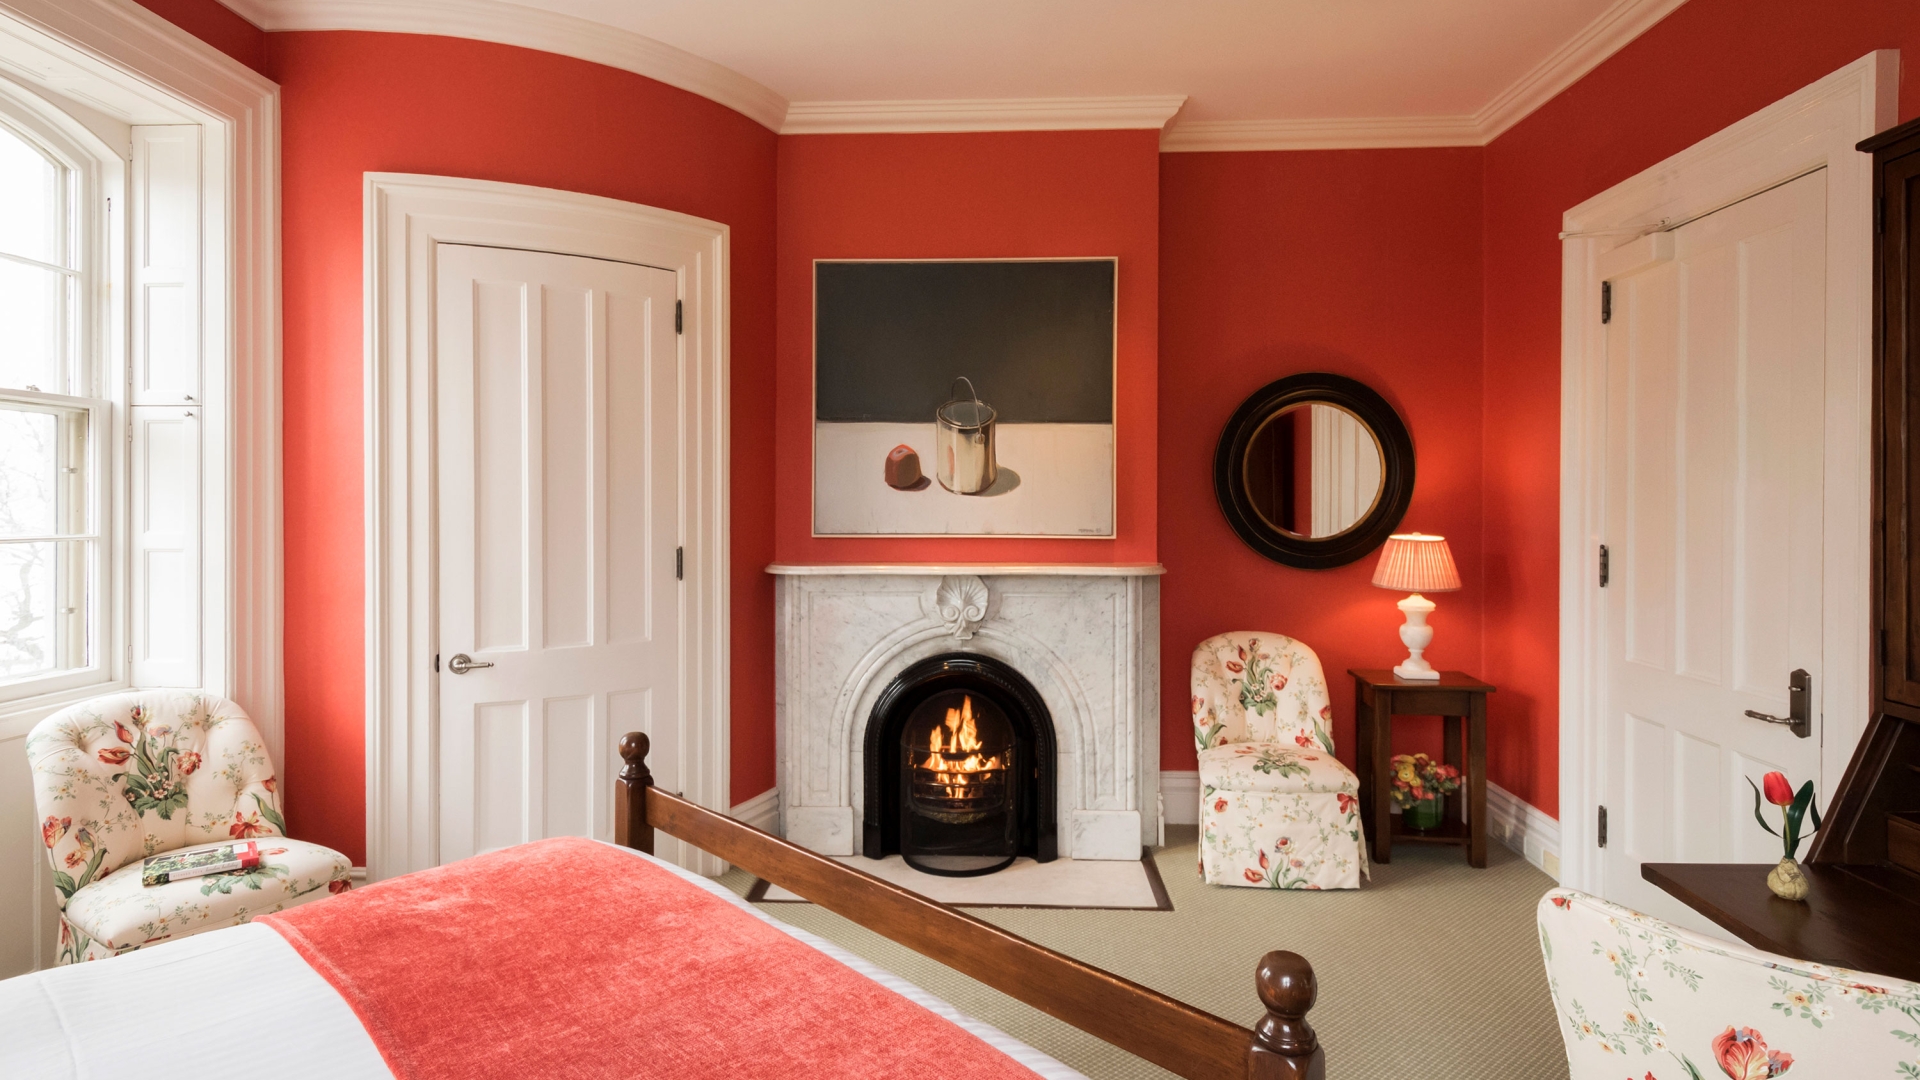 Red wall, white fireplace, and floral seating found in the Deluxe ADA room.